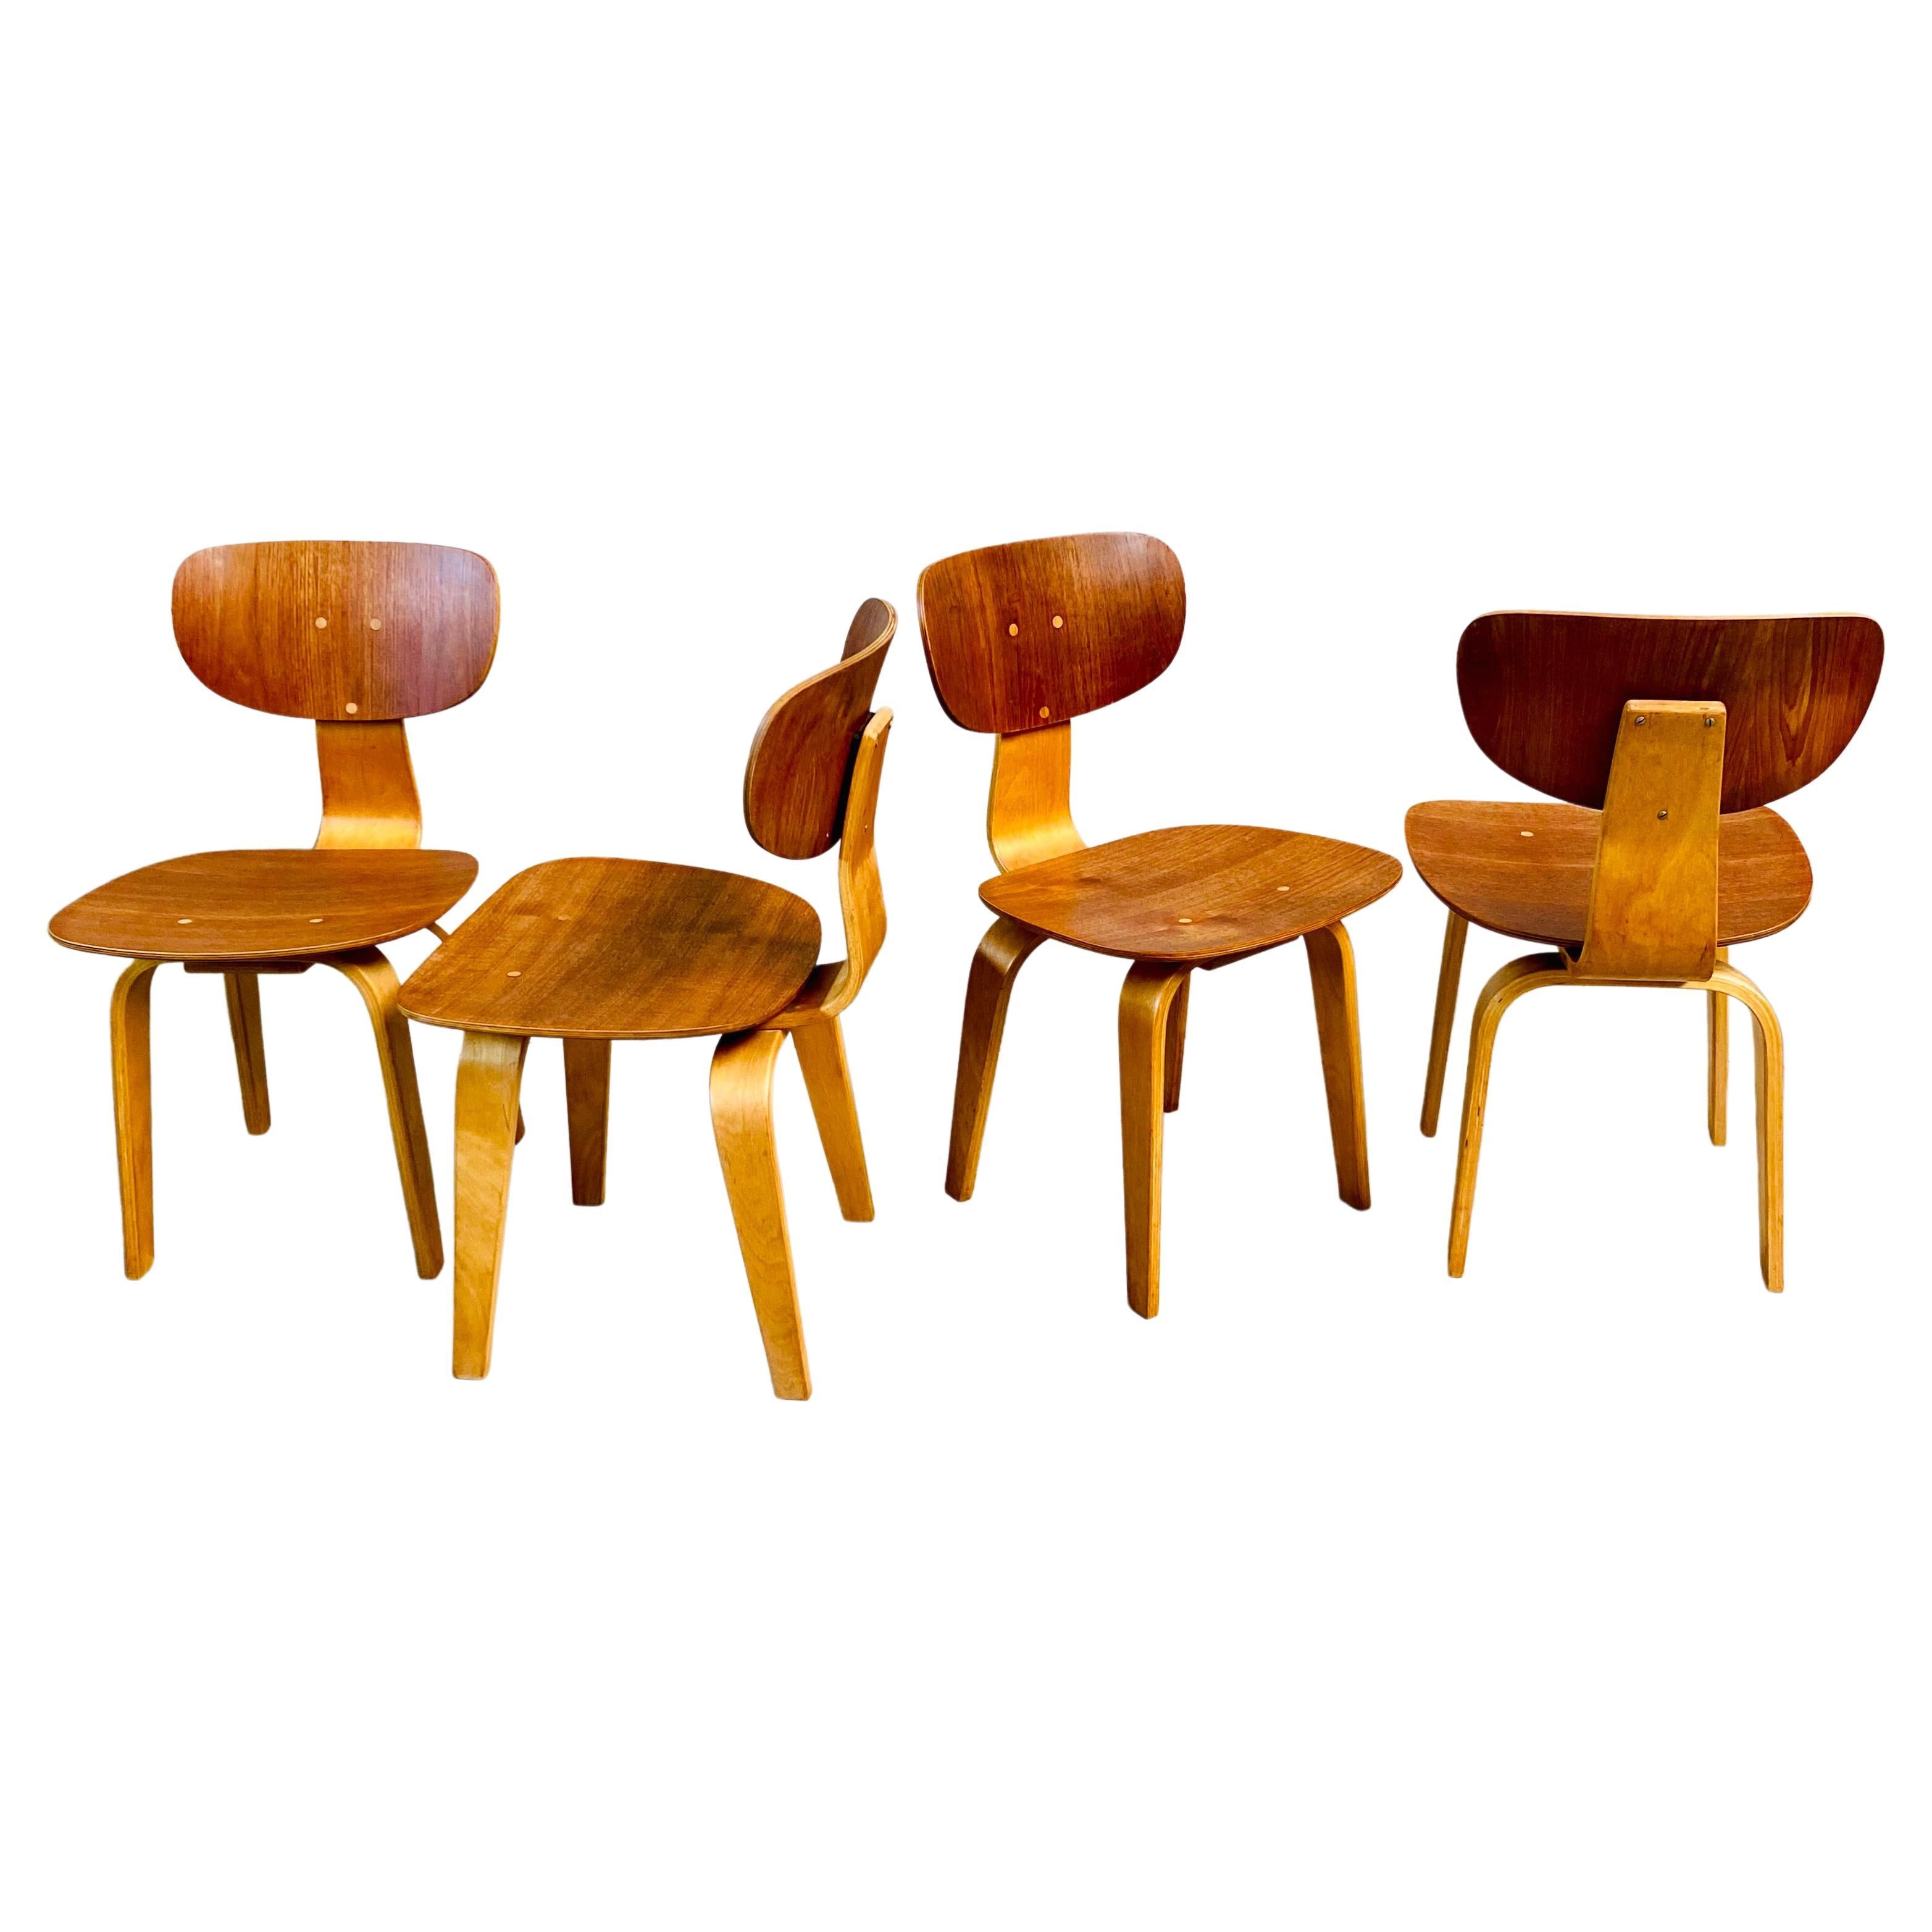 4 x Pastoe SB02 Dining Chairs by Cees Braakman Netherlands 1950 For Sale